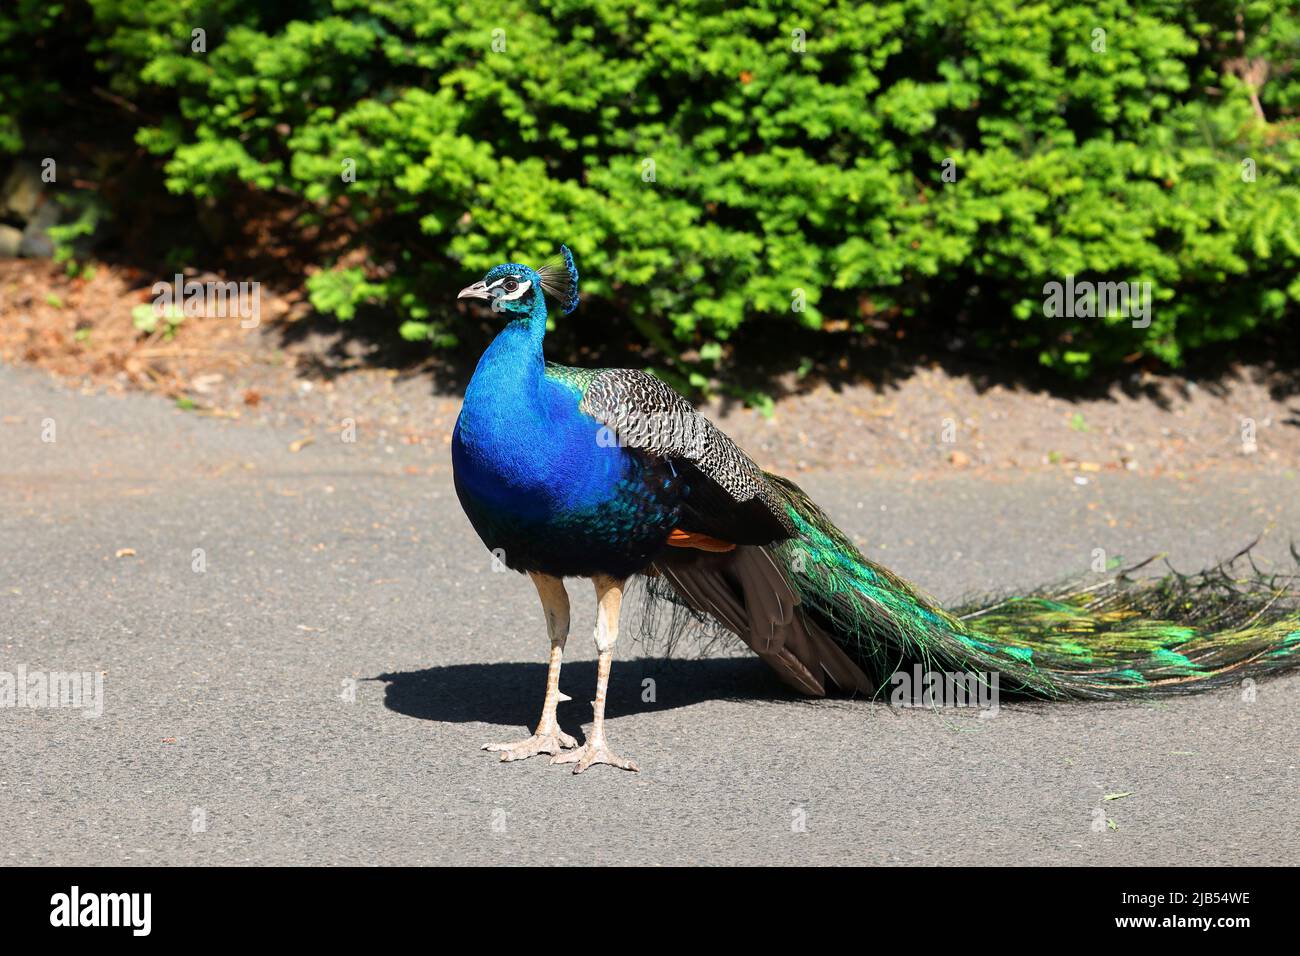 A male Indian Peafowl, Pavo cristatus, Indian Peacock standing on asphalt in an urban setting. Stock Photo